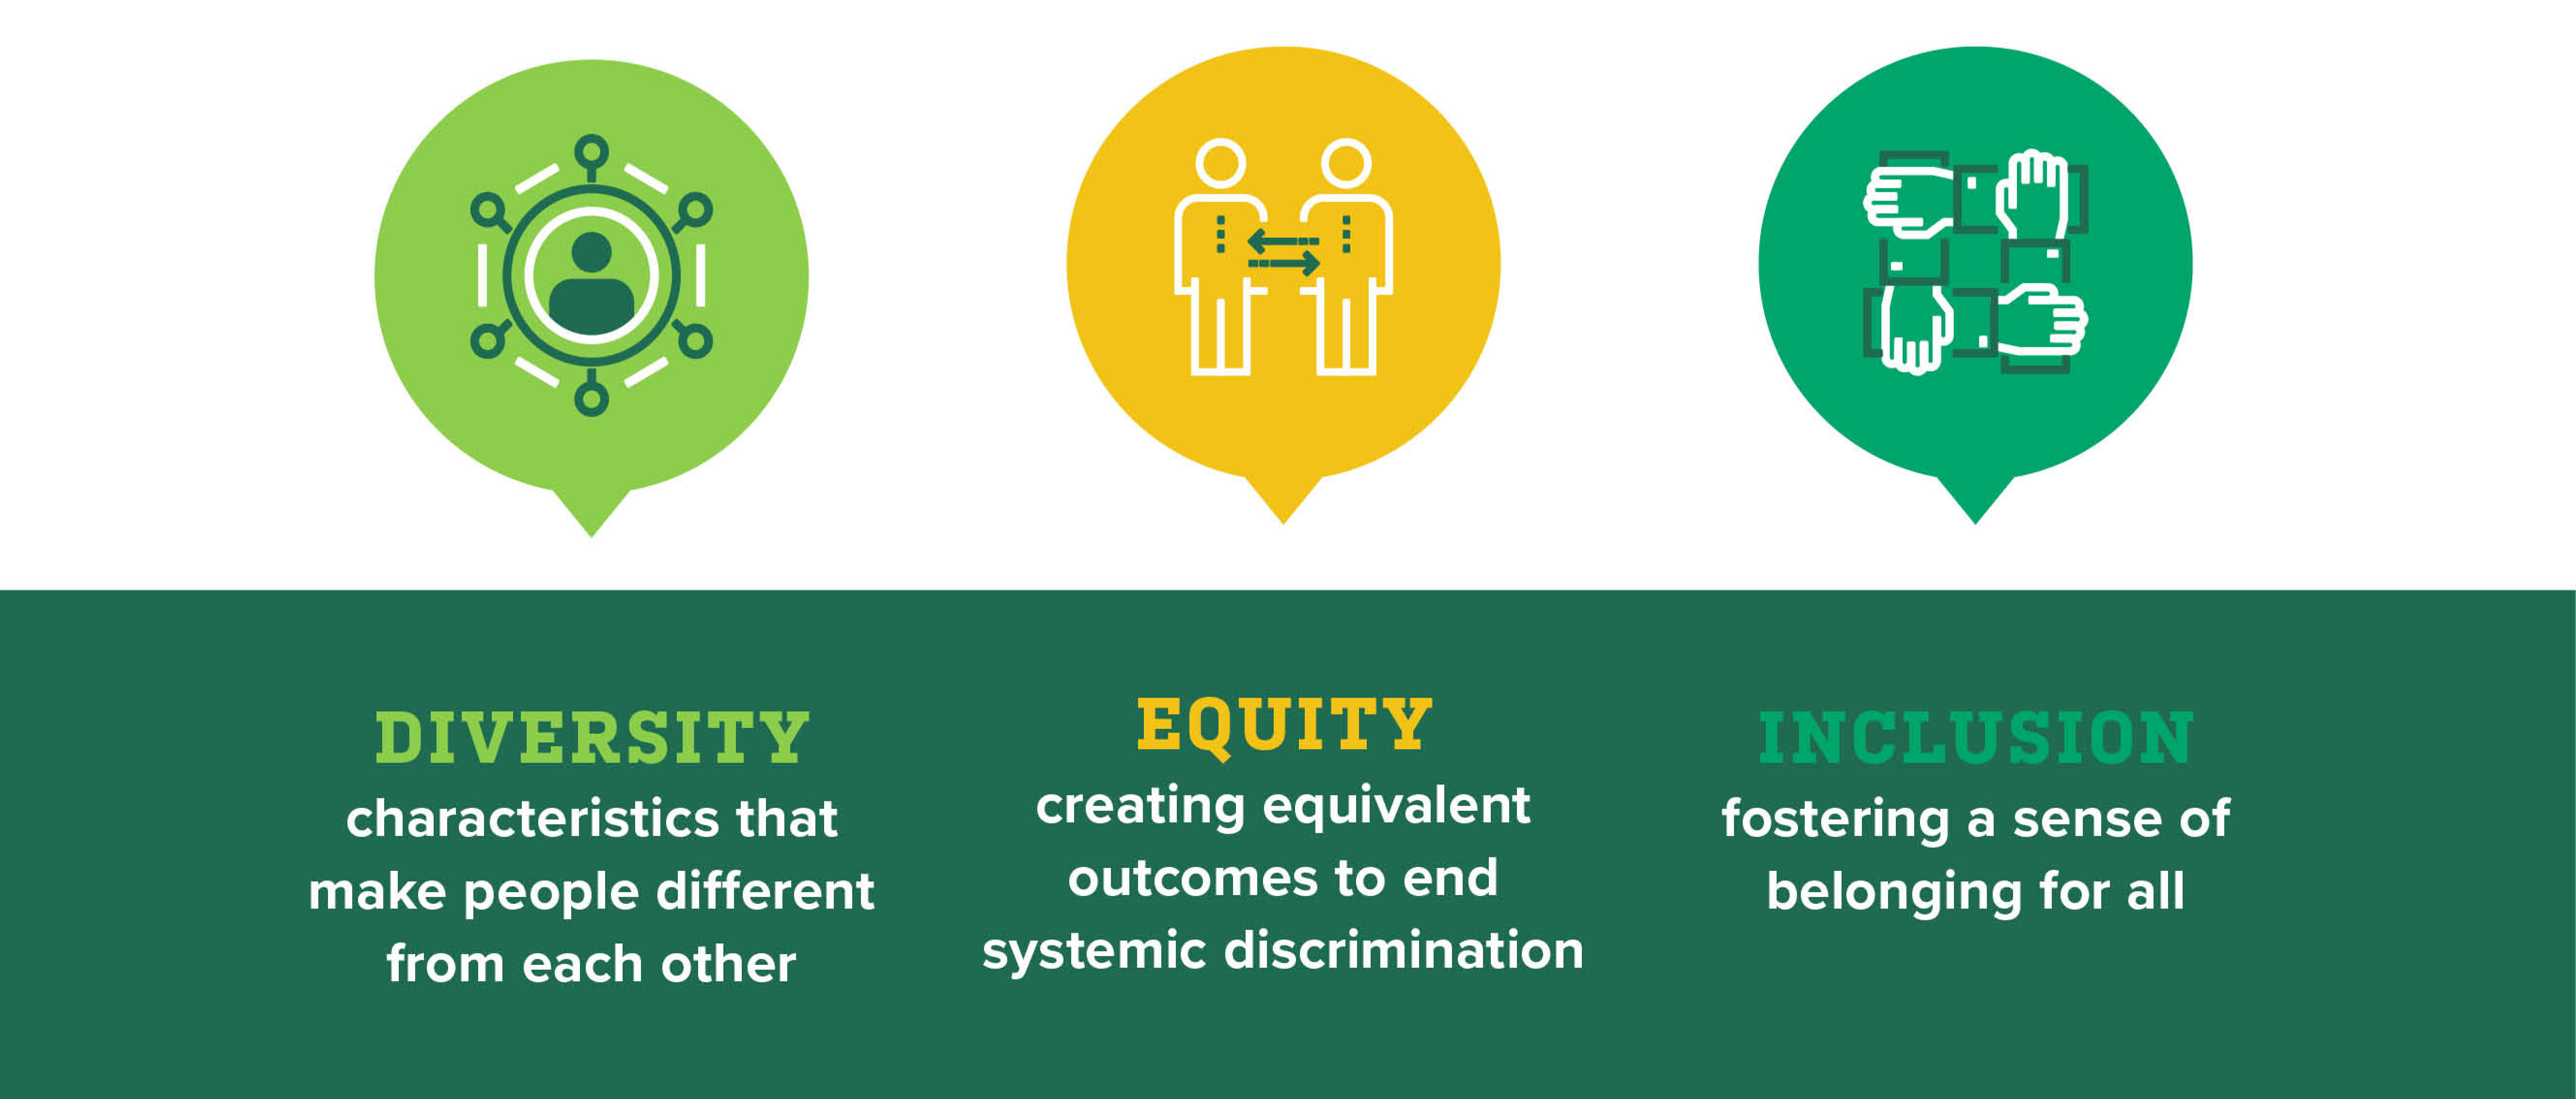 Definitions of the terms diversity, equity, and inclusion. Follow link for alternative text.